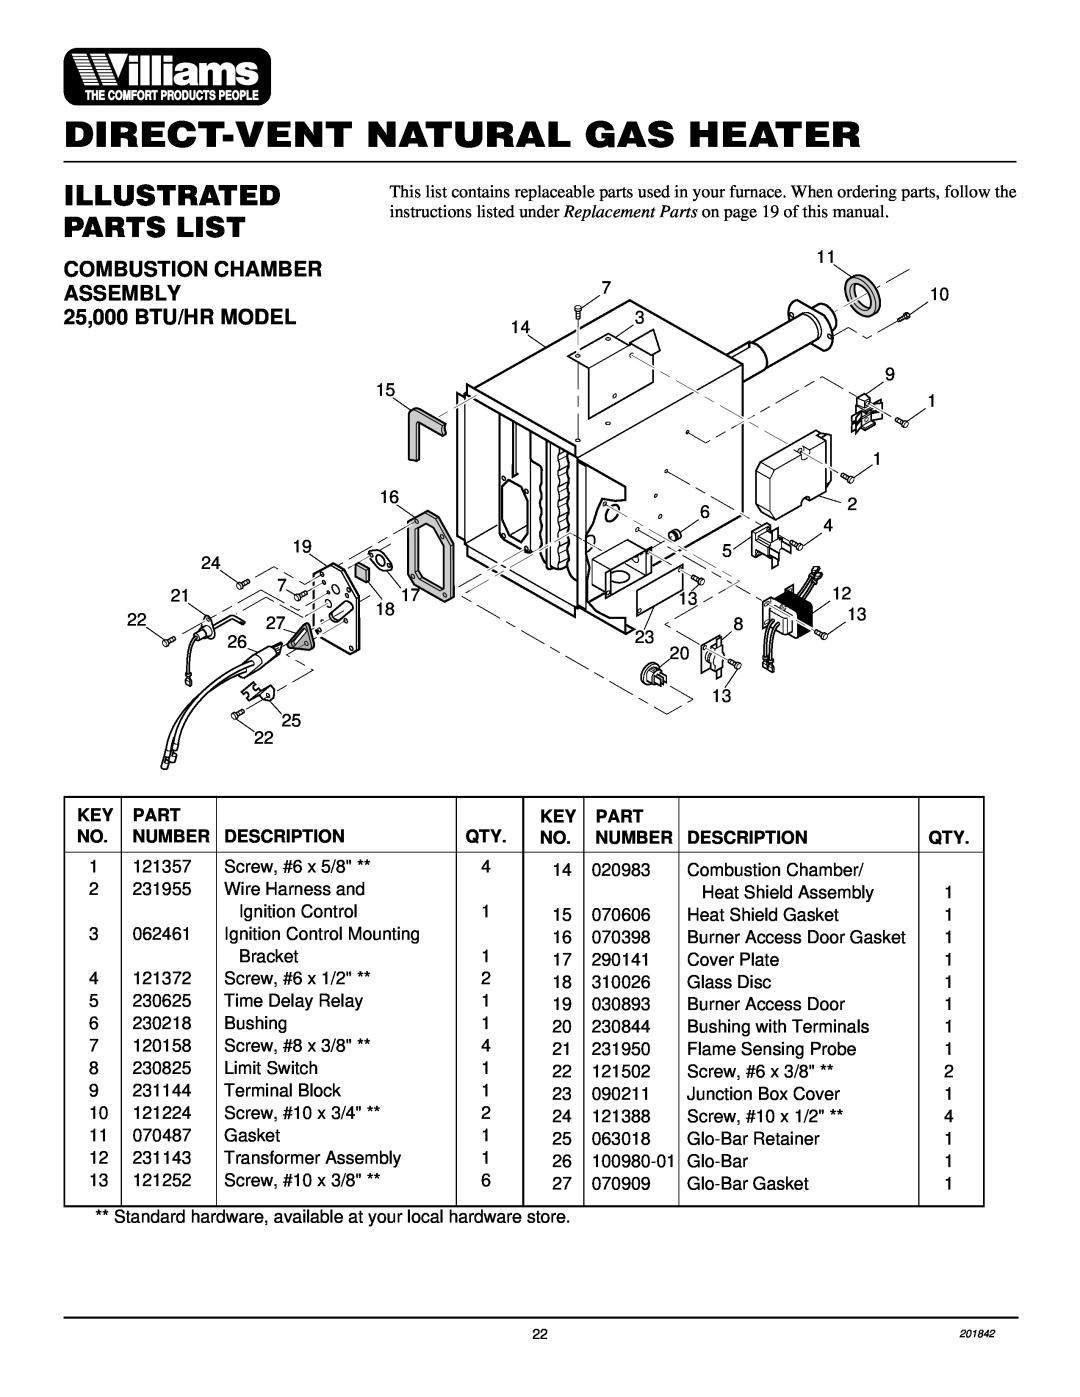 Williams 2503532 Direct-Ventnatural Gas Heater, Illustrated Parts List, Combustion Chamber Assembly, 25,000 BTU/HR MODEL 